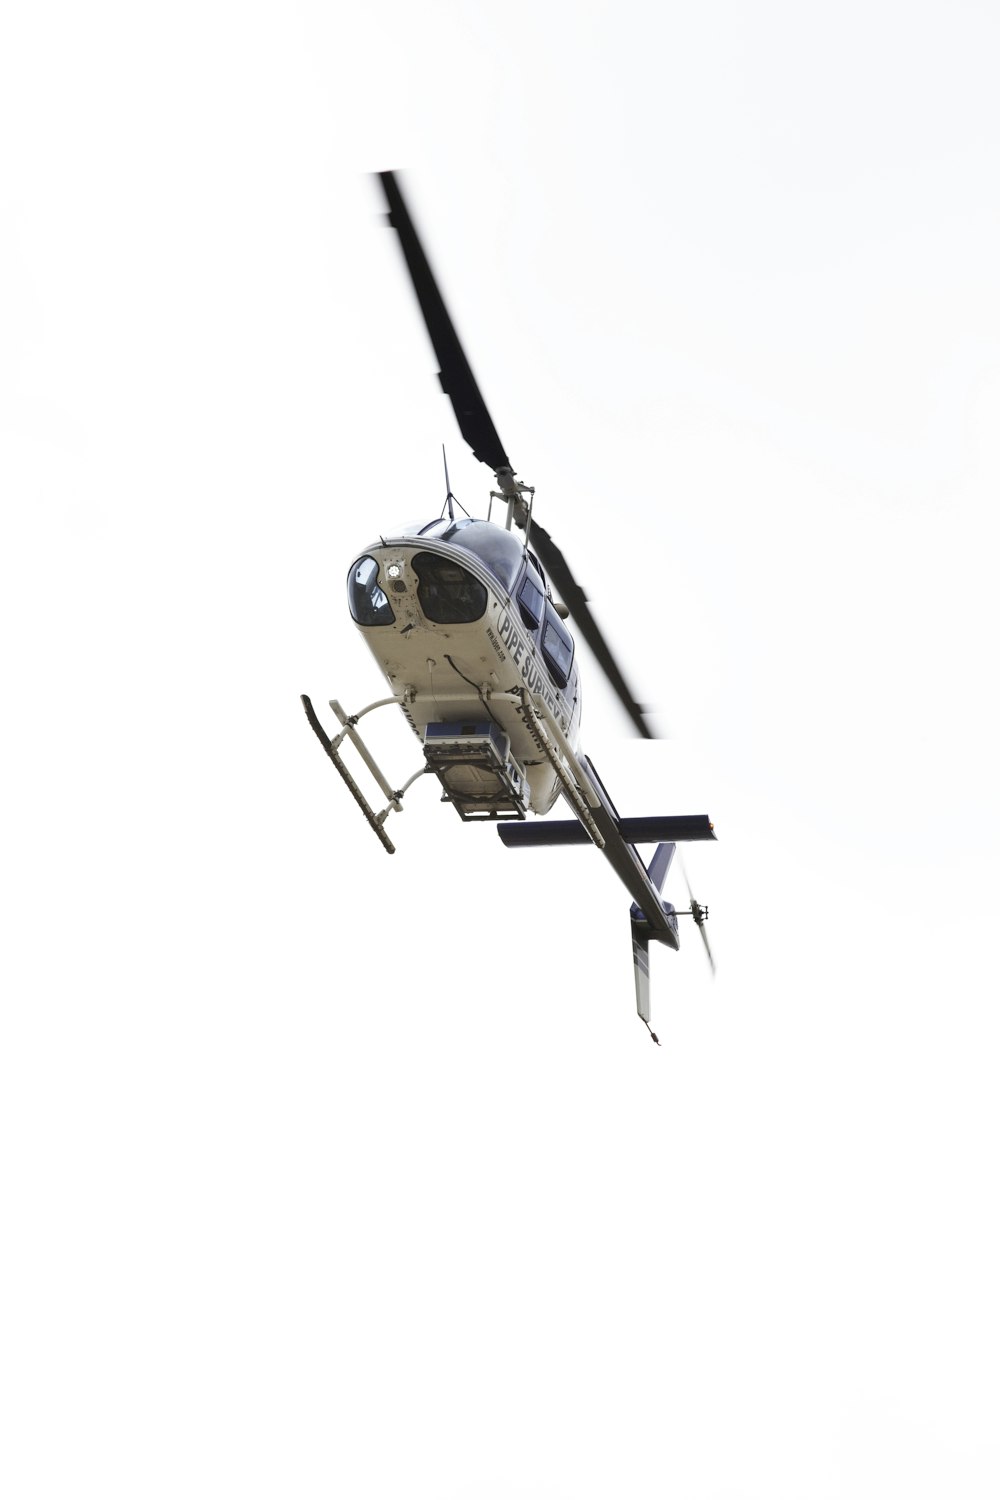 brown and black helicopter flying in the sky